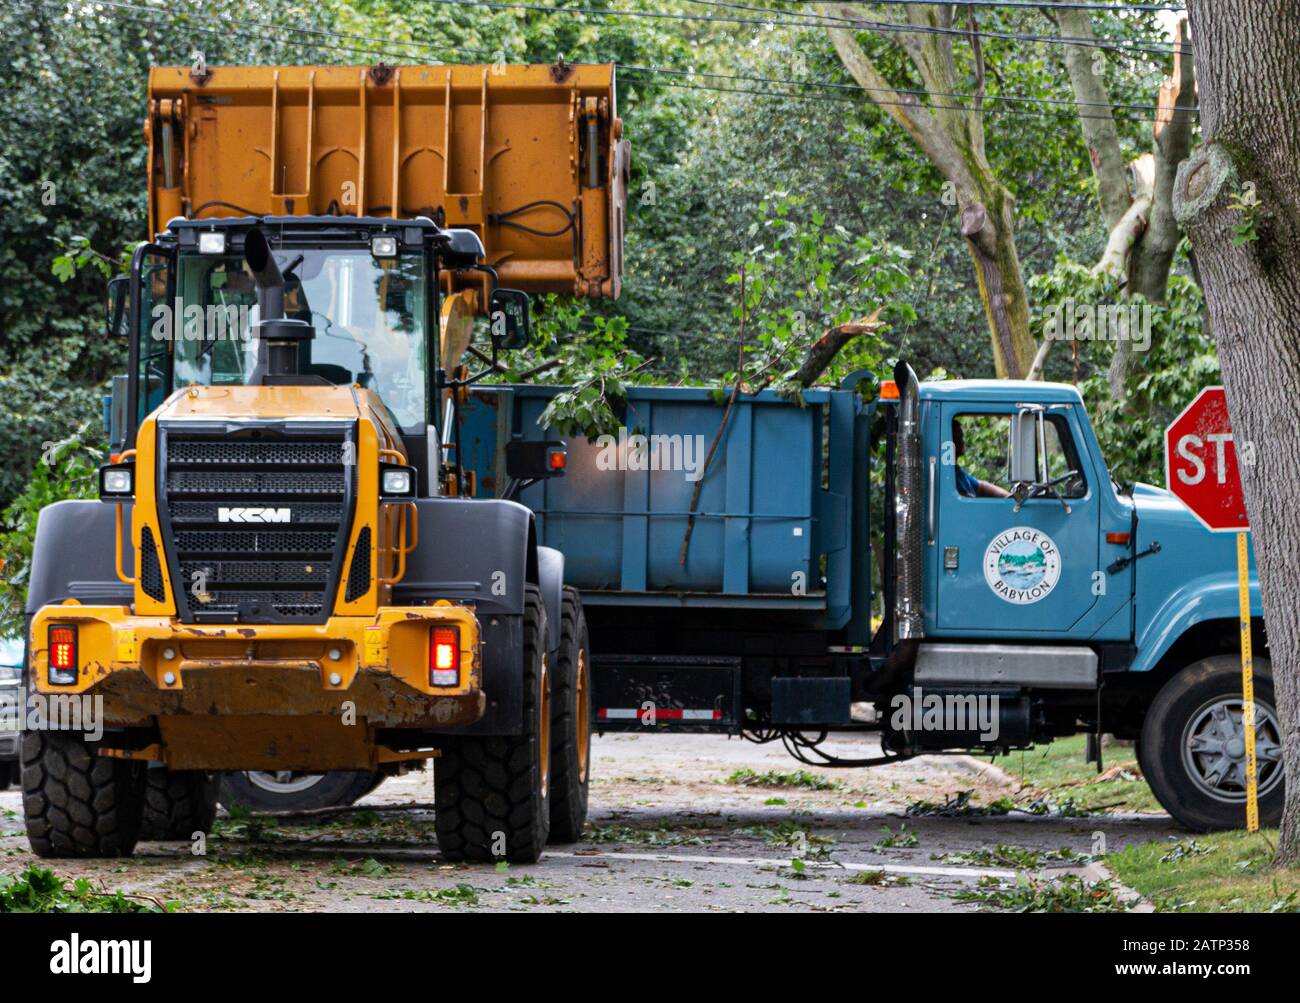 Babylon, New York, USA - 23 August 2019: Babylon Village trucks clearing a road full of trees after a hurricane and strong winds caused damge and tree Stock Photo